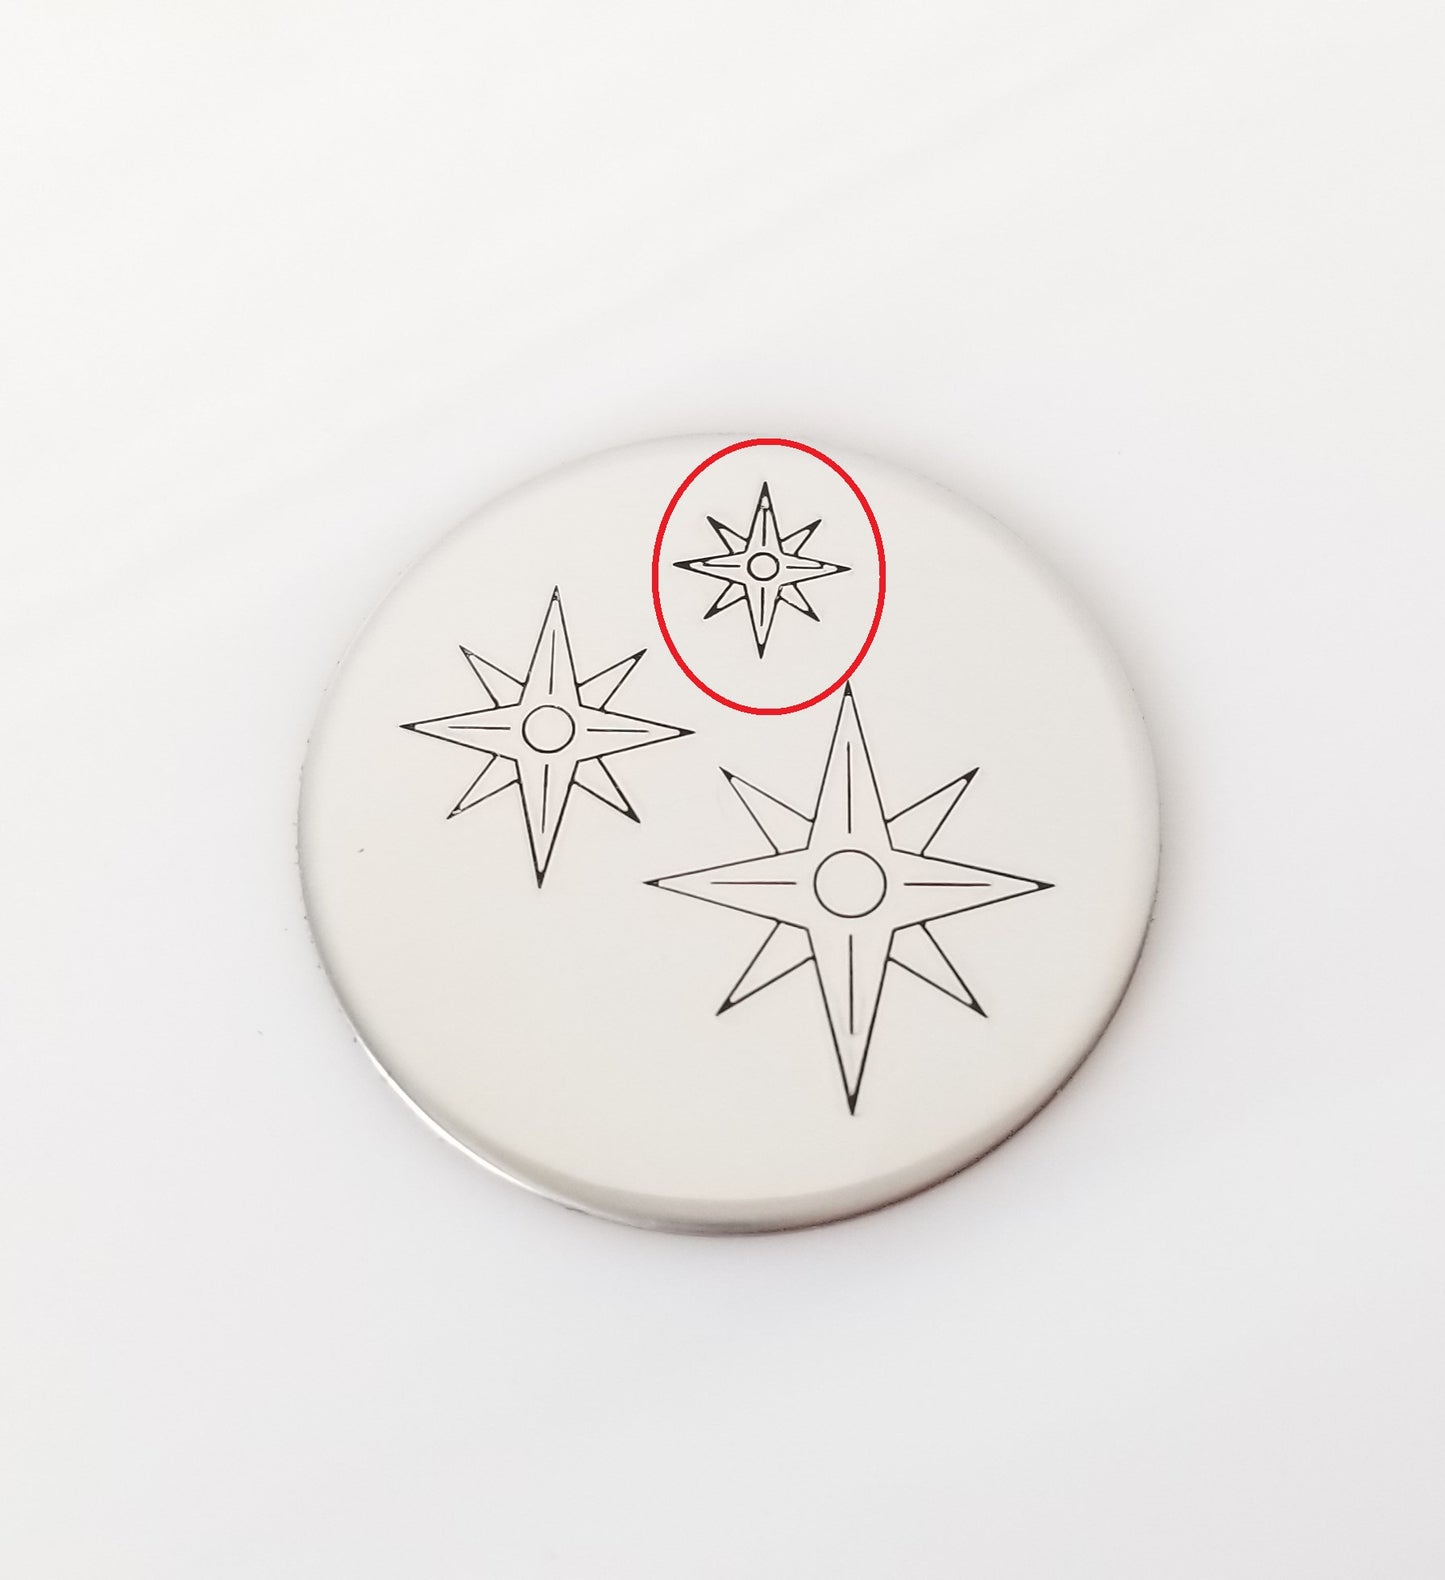 Compass without Directional Lettering